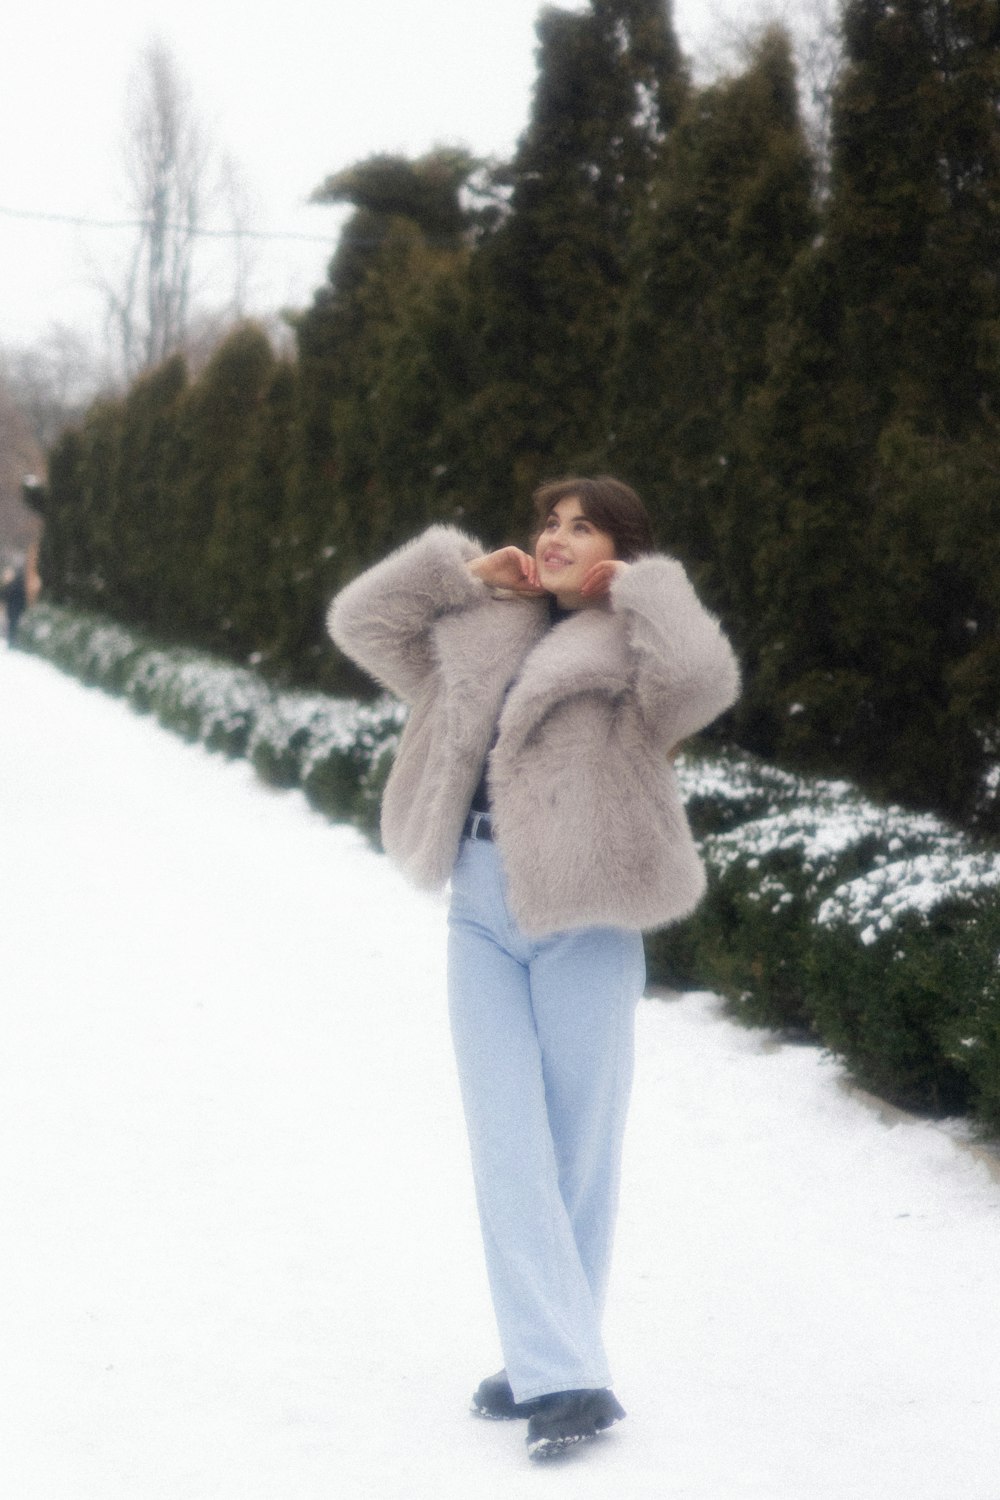 a woman standing in the snow wearing a fur coat